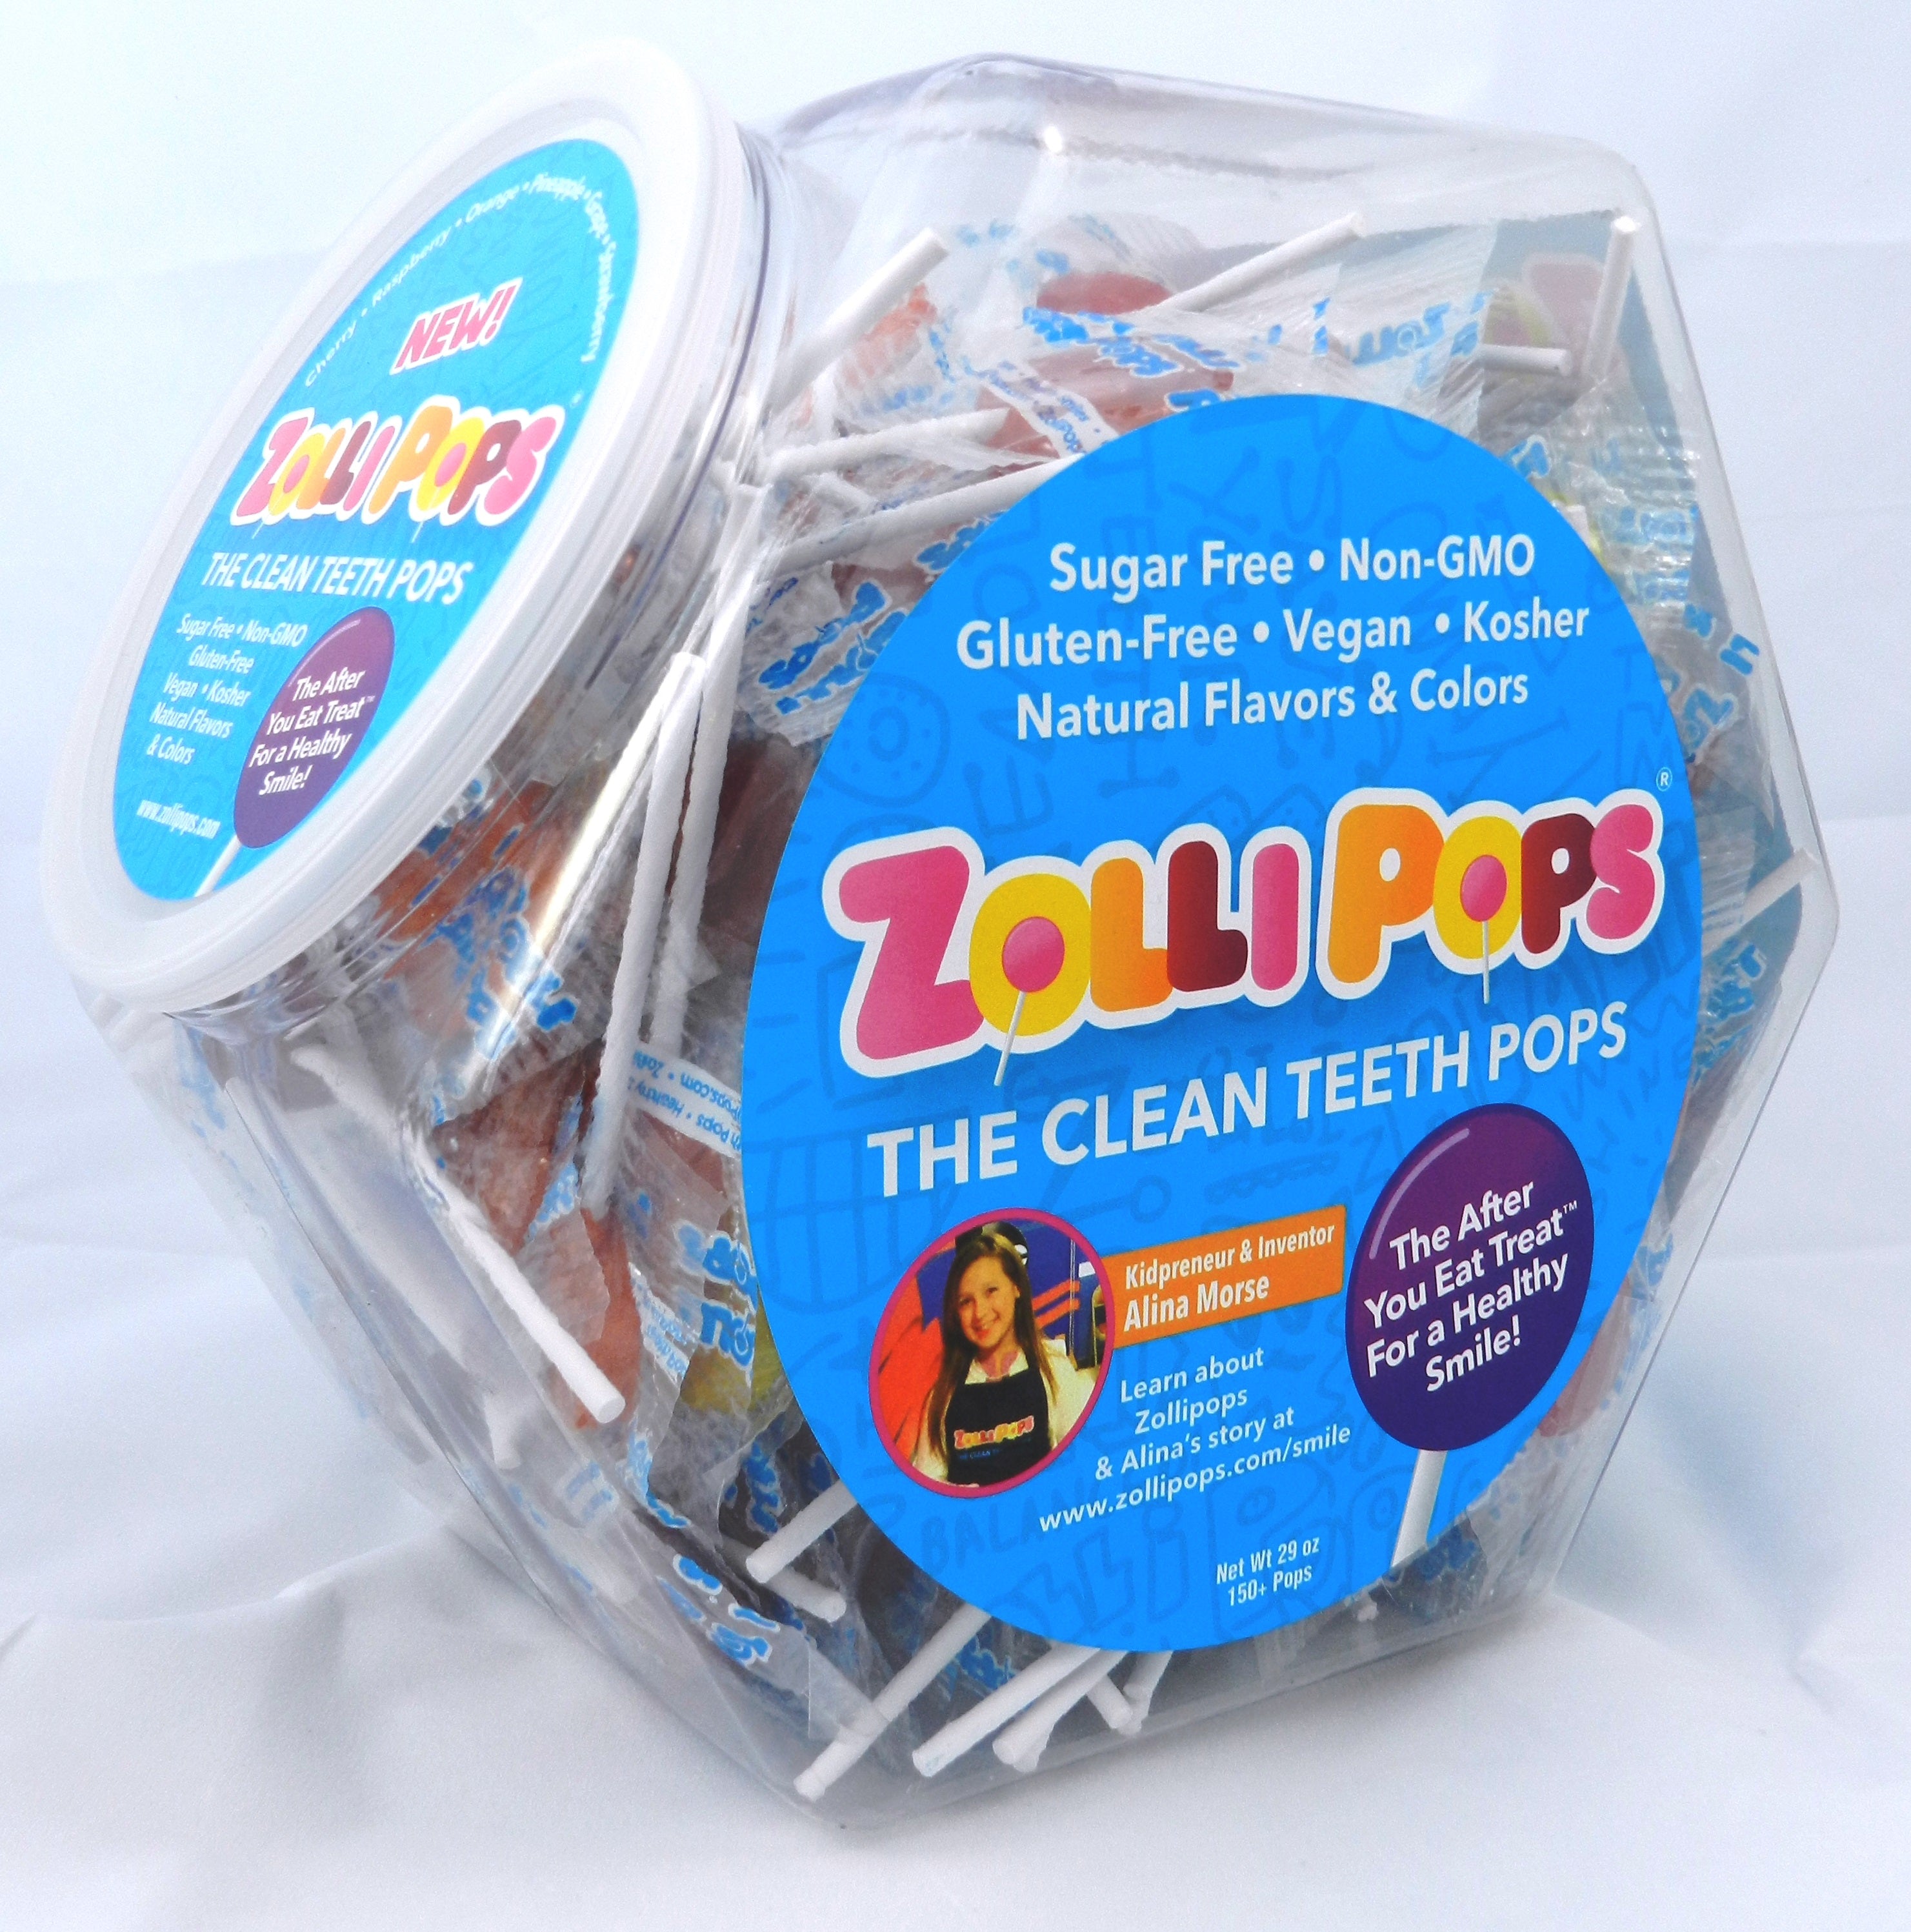 Zolli Candy Special Bundle